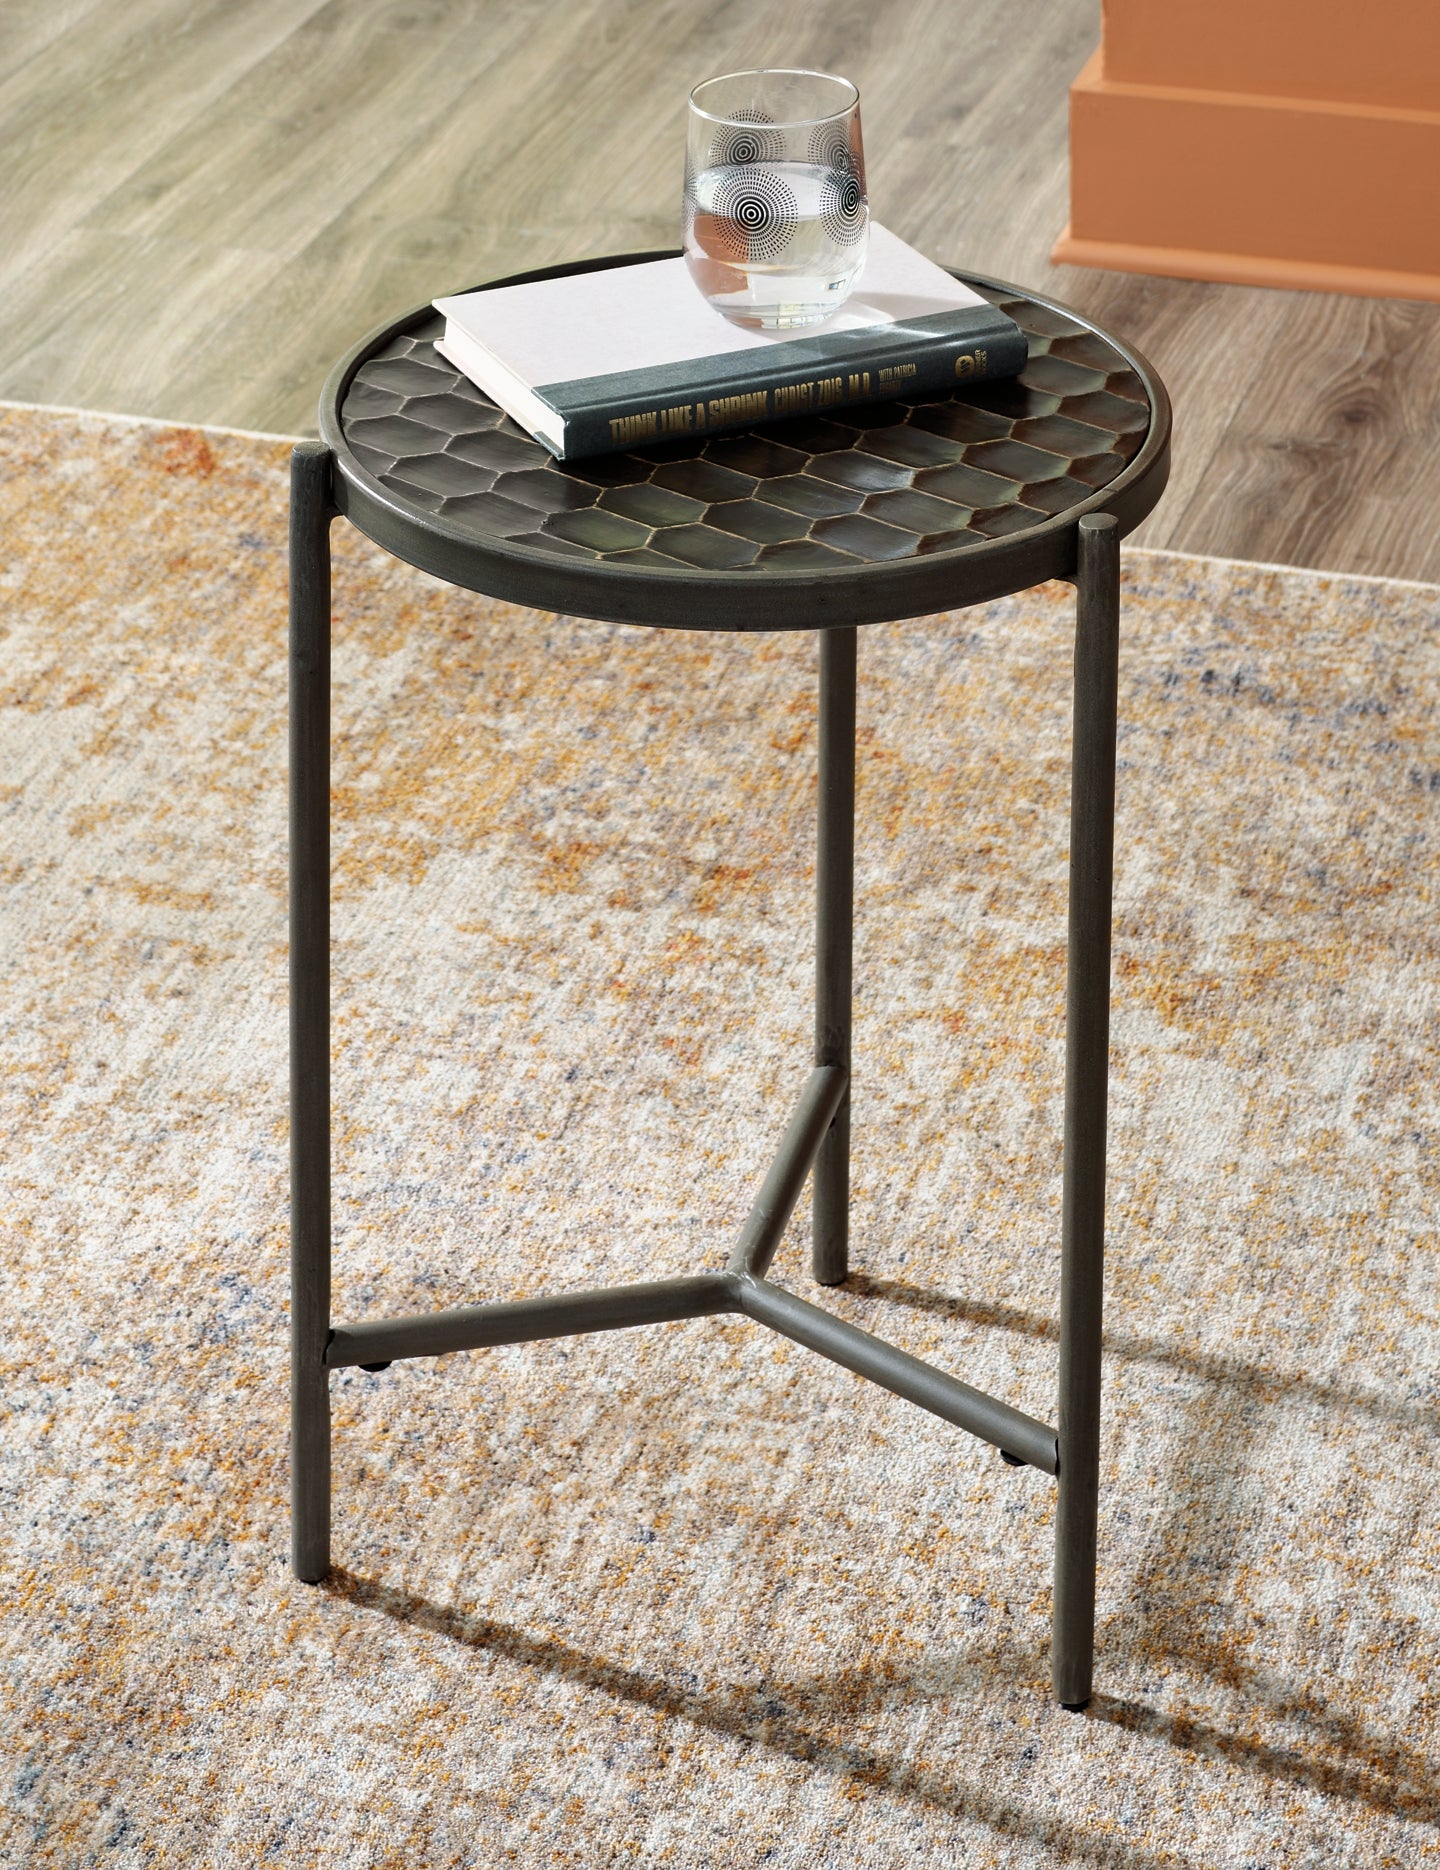 Doraley Coffee Table with 2 End Tables JB's Furniture  Home Furniture, Home Decor, Furniture Store